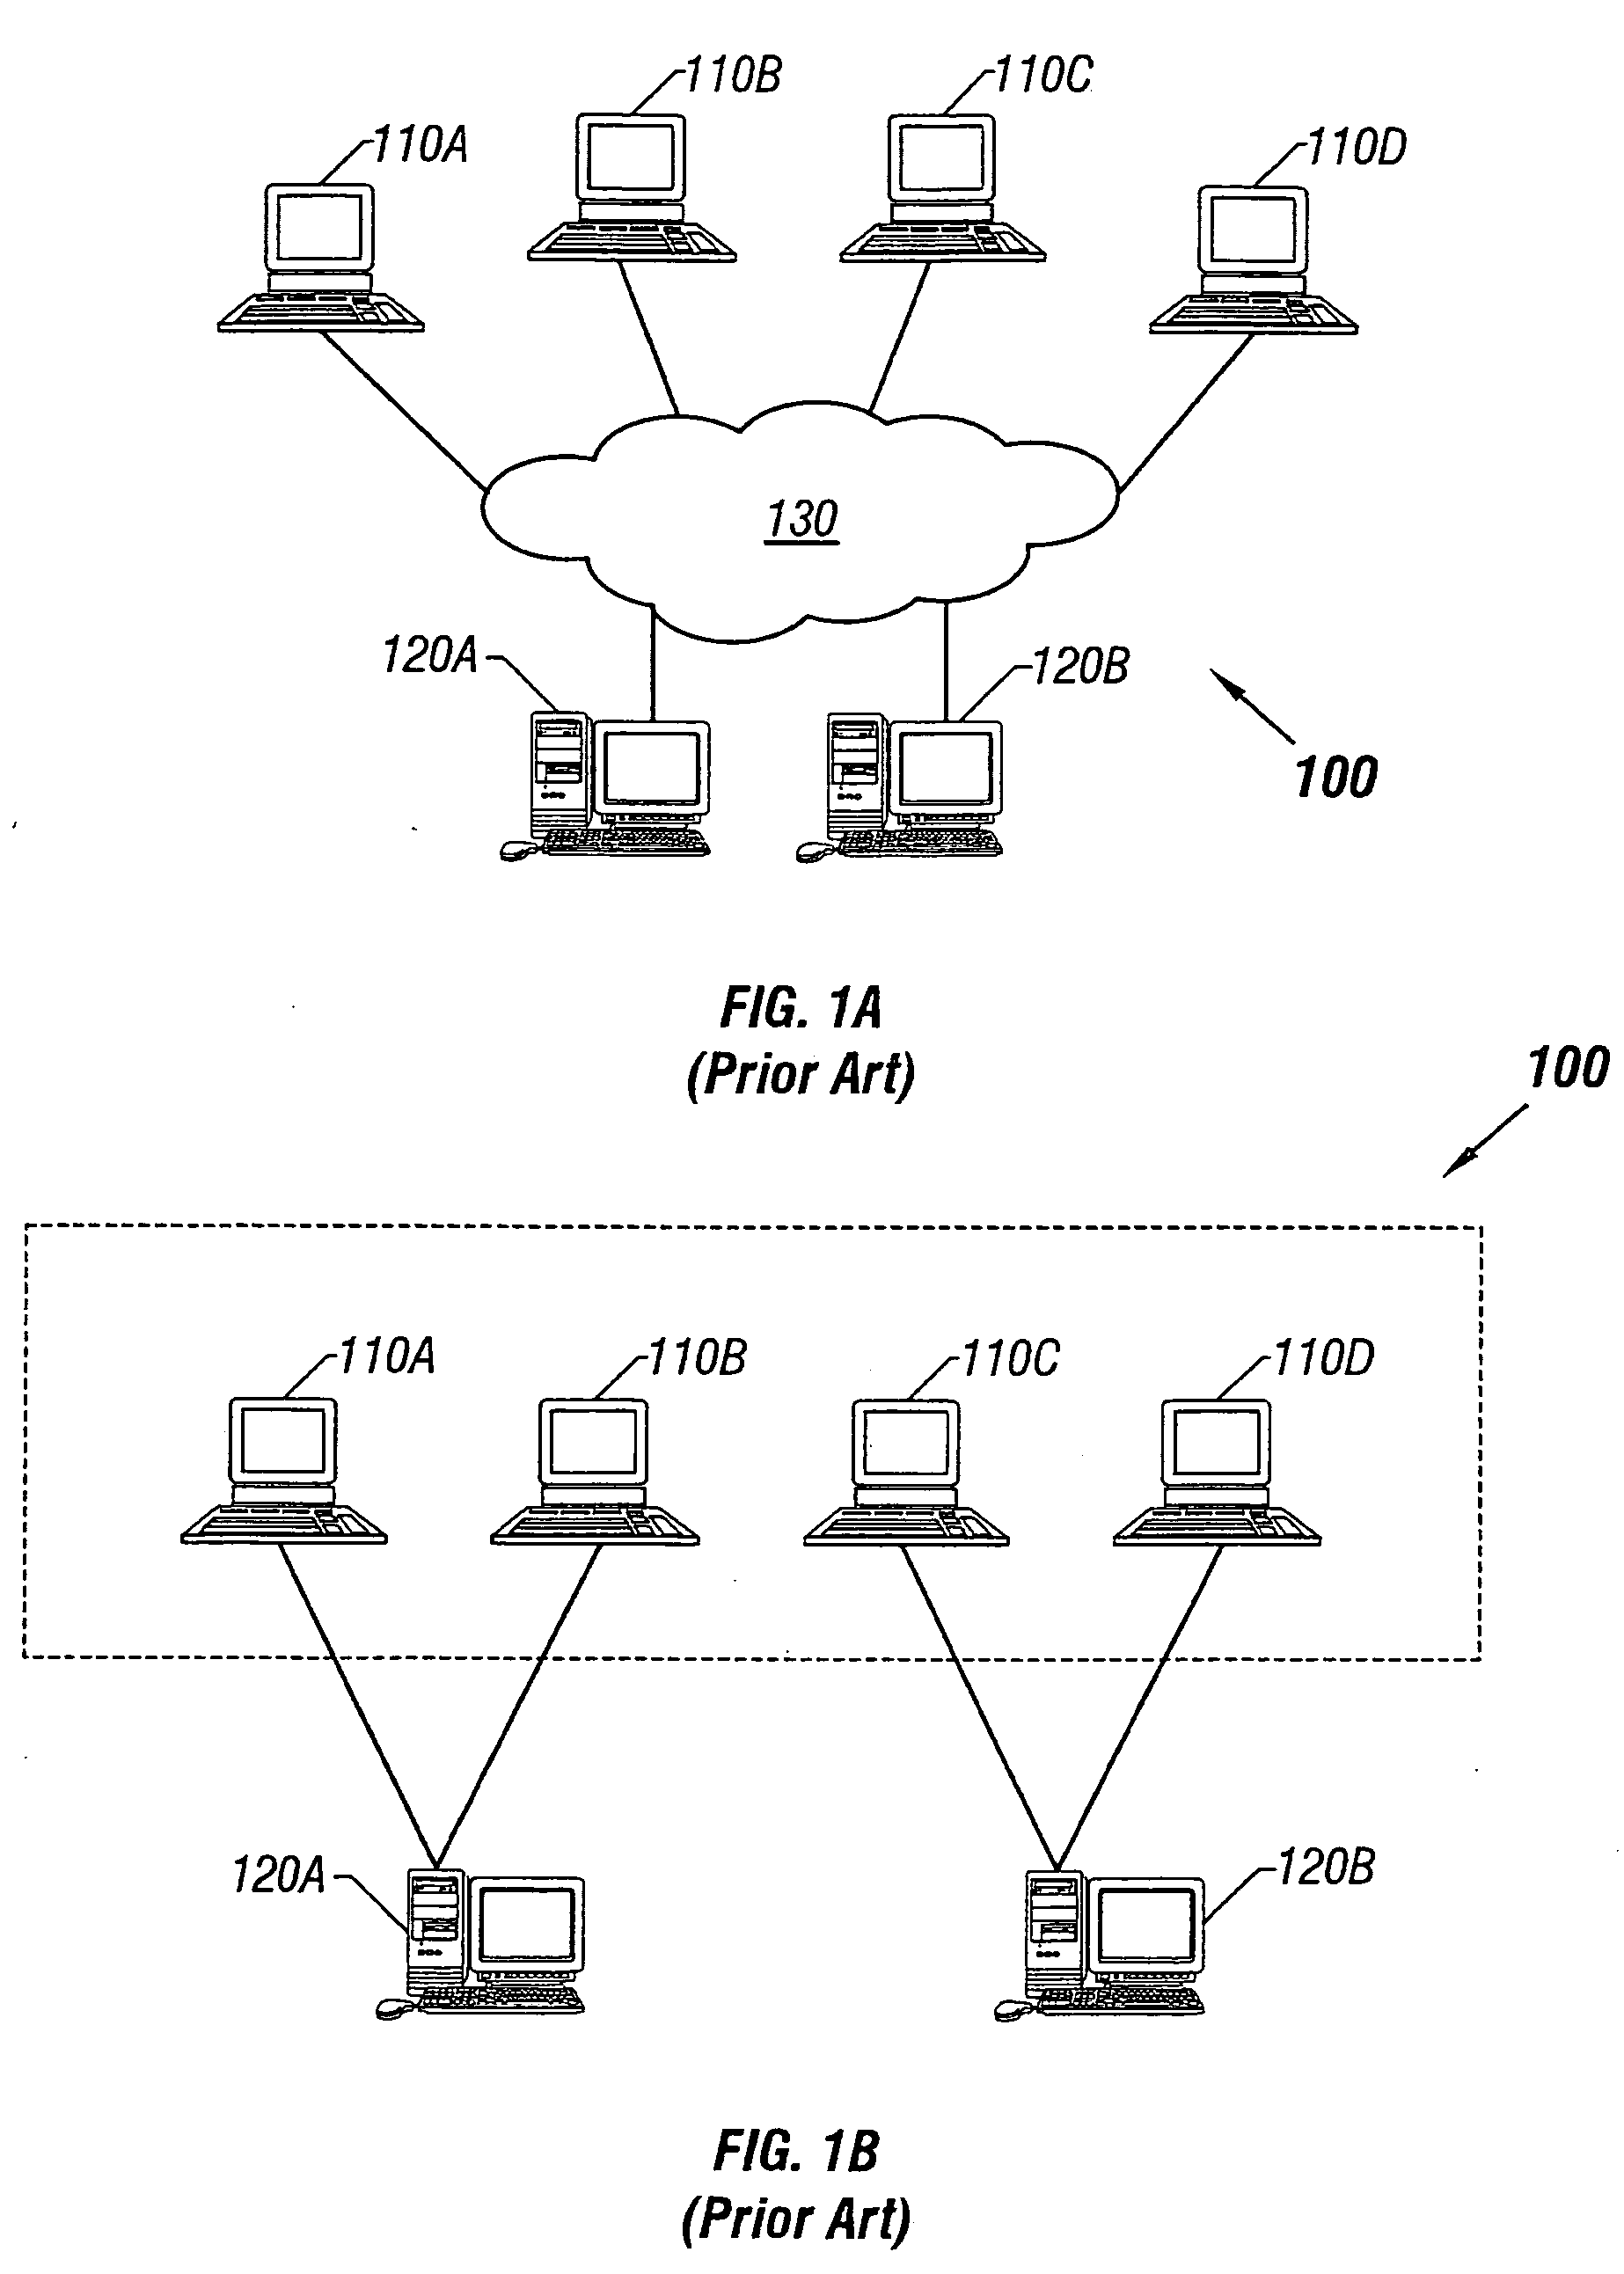 Distributed network system architecture for collaborative computing